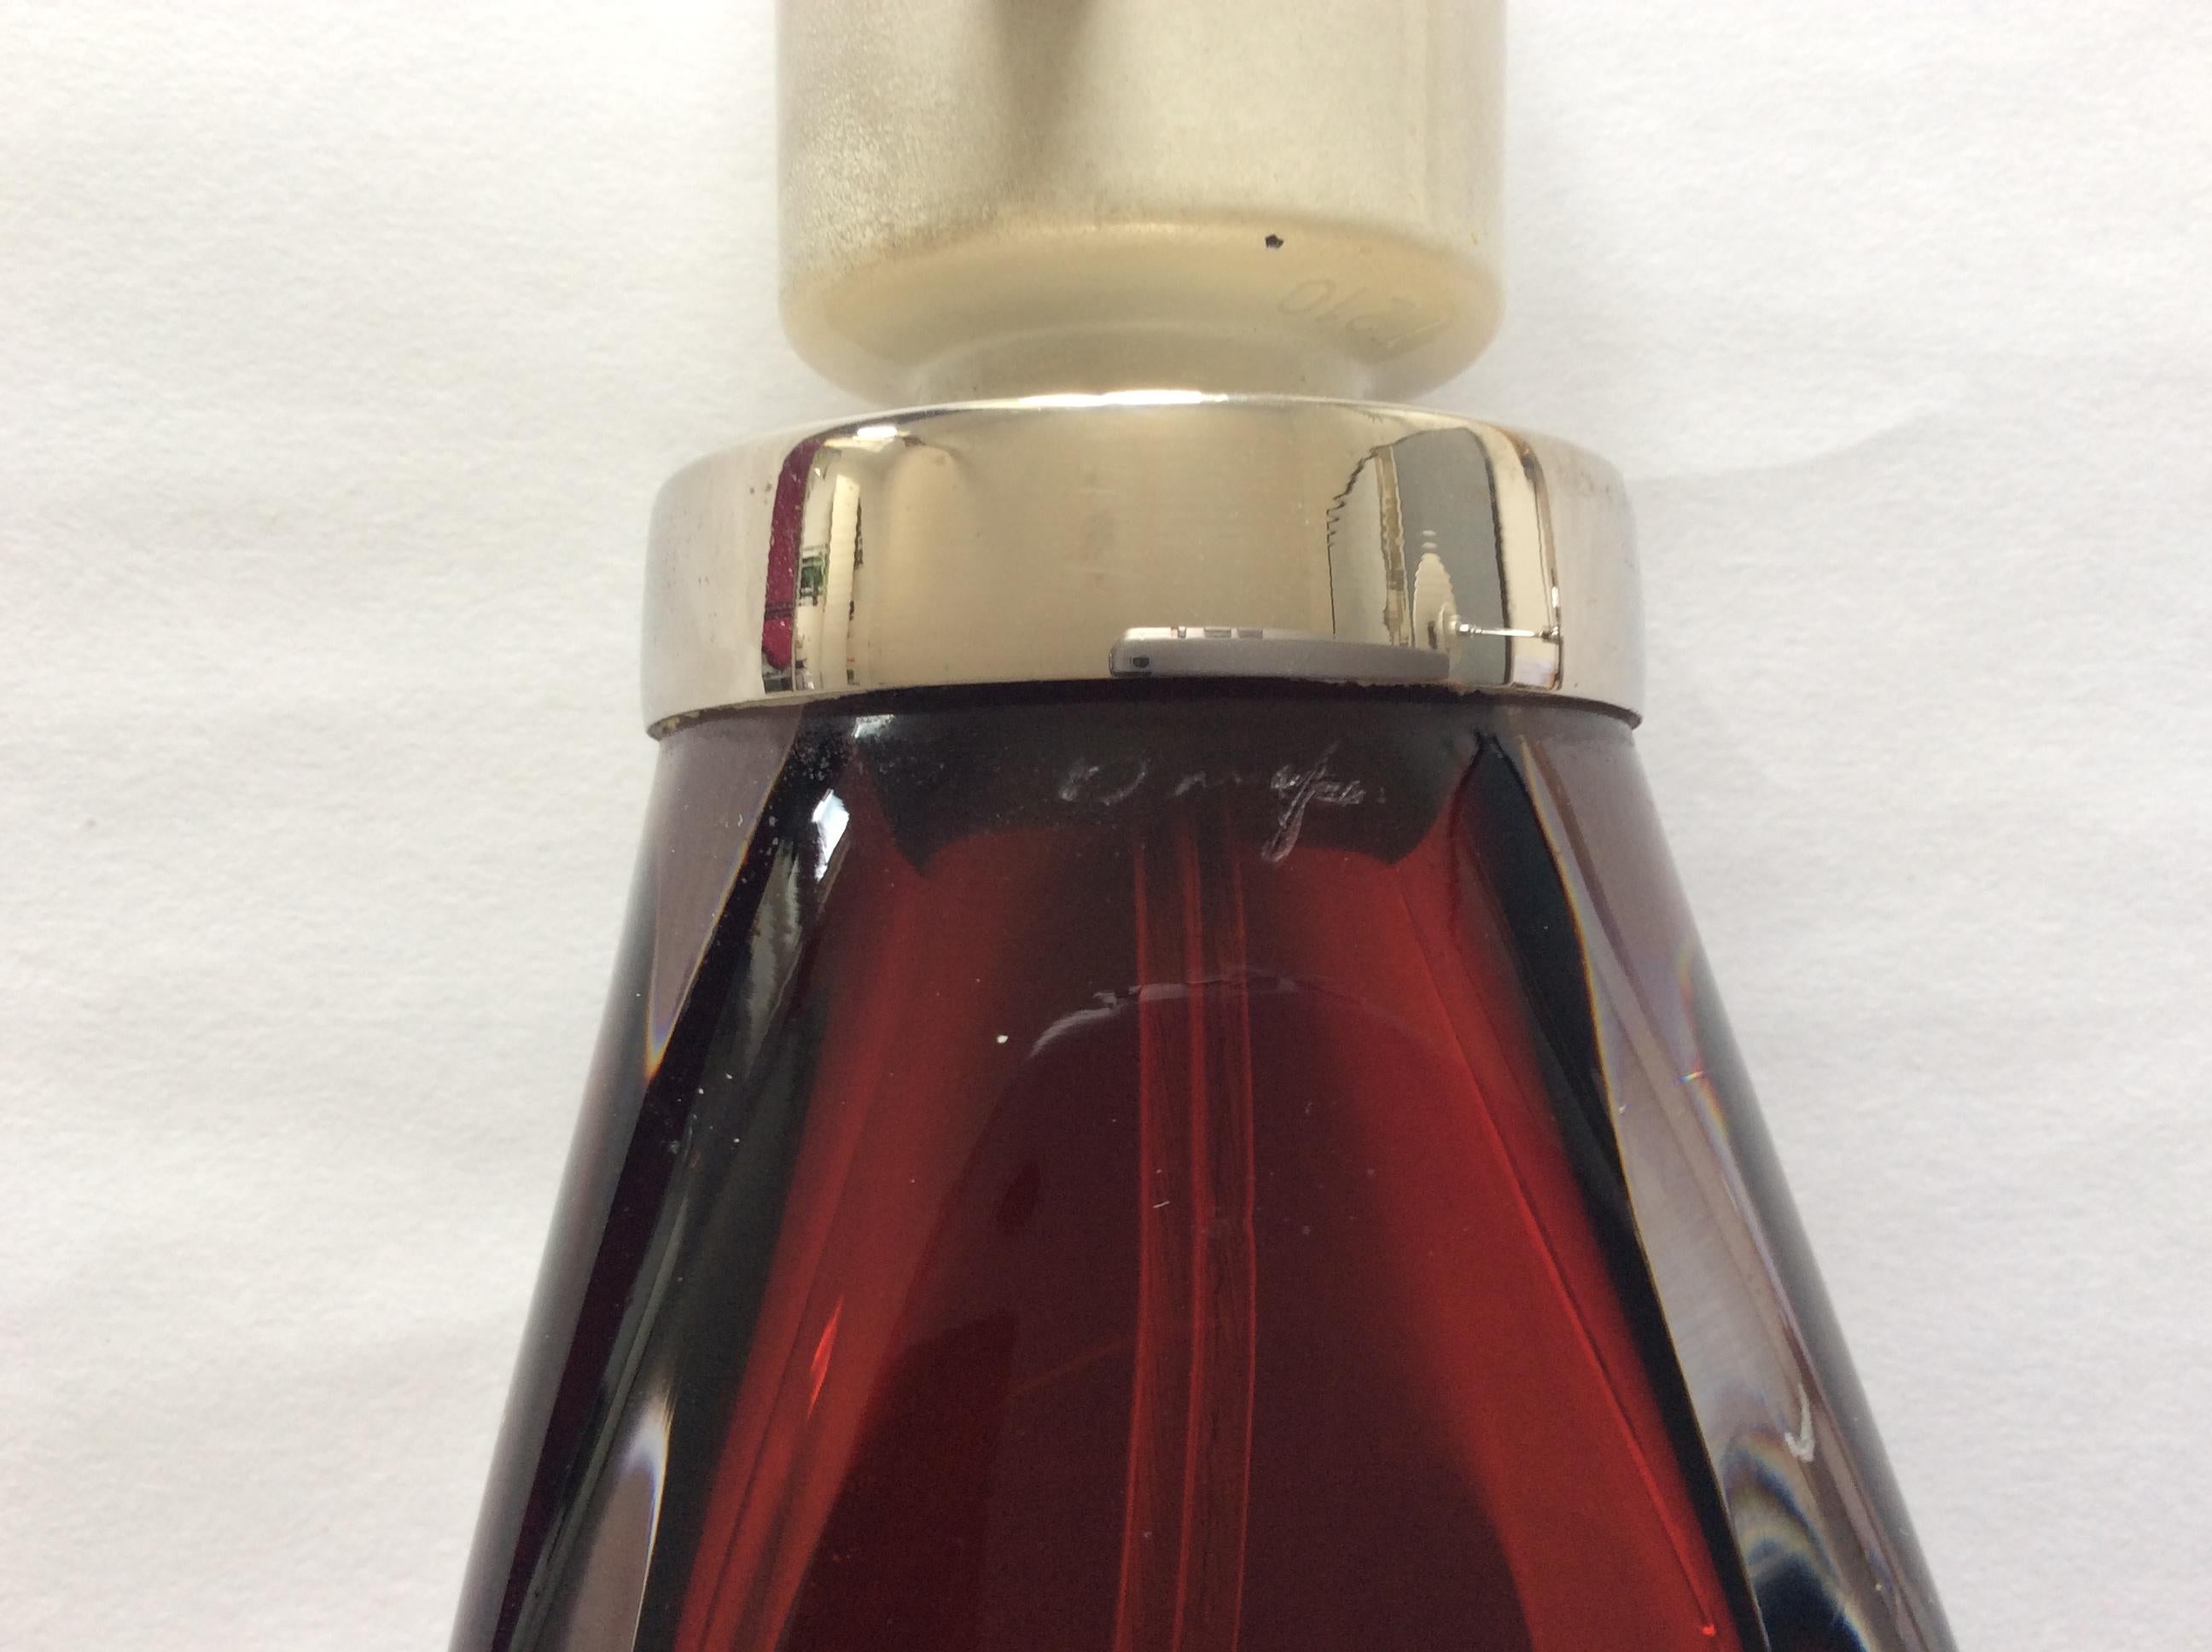 Table lamp, ruby-red with clear glass, designed by Carl Fagerlund.
Produced by Orrefors in Sweden, model RD 1884. Signed at the top. The lamp is offered without shade.
Measurements: Height with socket, circa 36.5 cm.

 